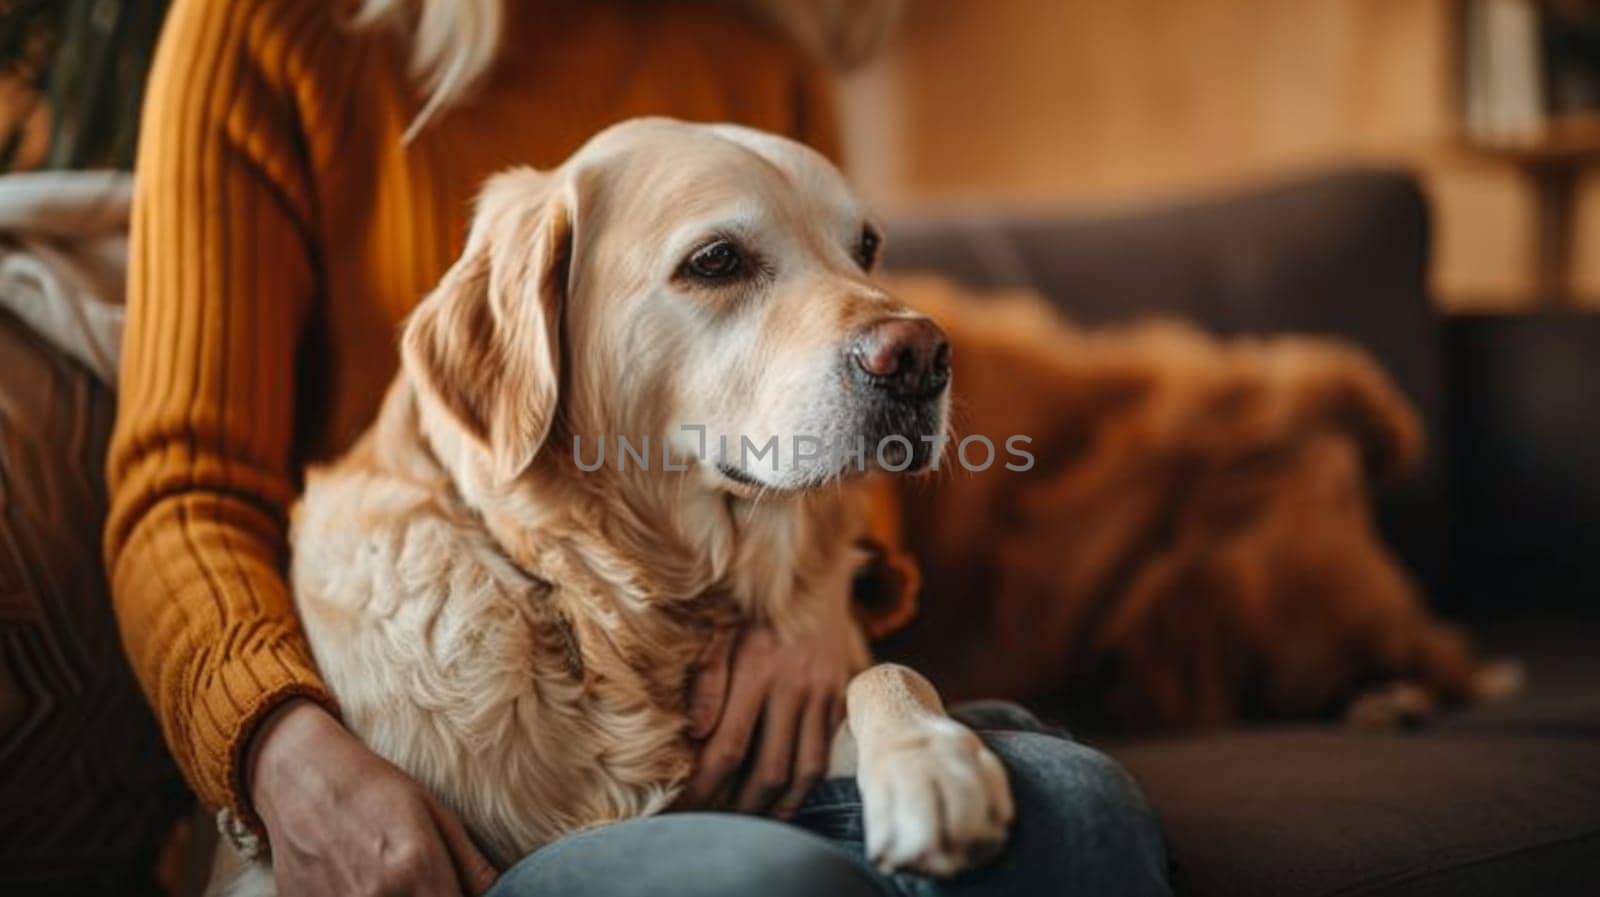 A woman sitting on a couch with her dog in her lap